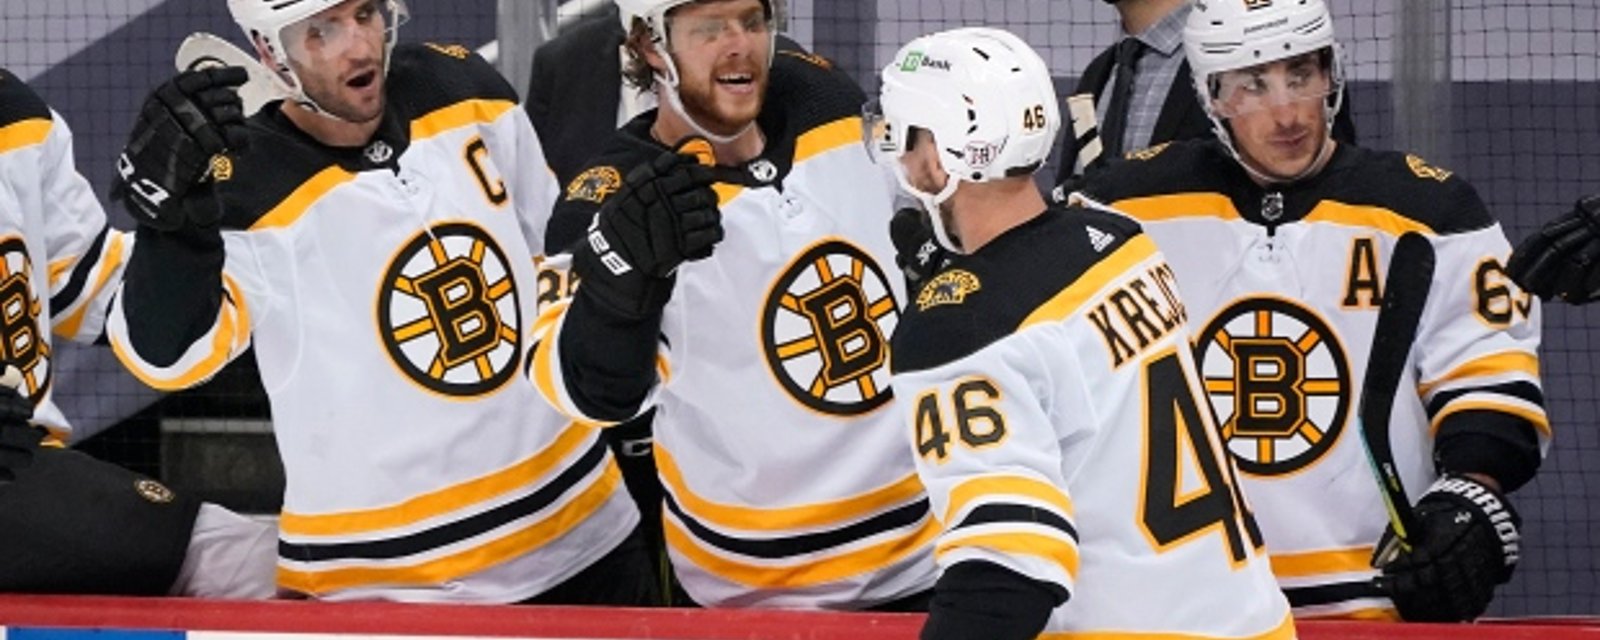 Bruins to sacrifice one player on trade block to sign Patrice Bergeron, Dave Krejci and Pavel Zacha to contracts